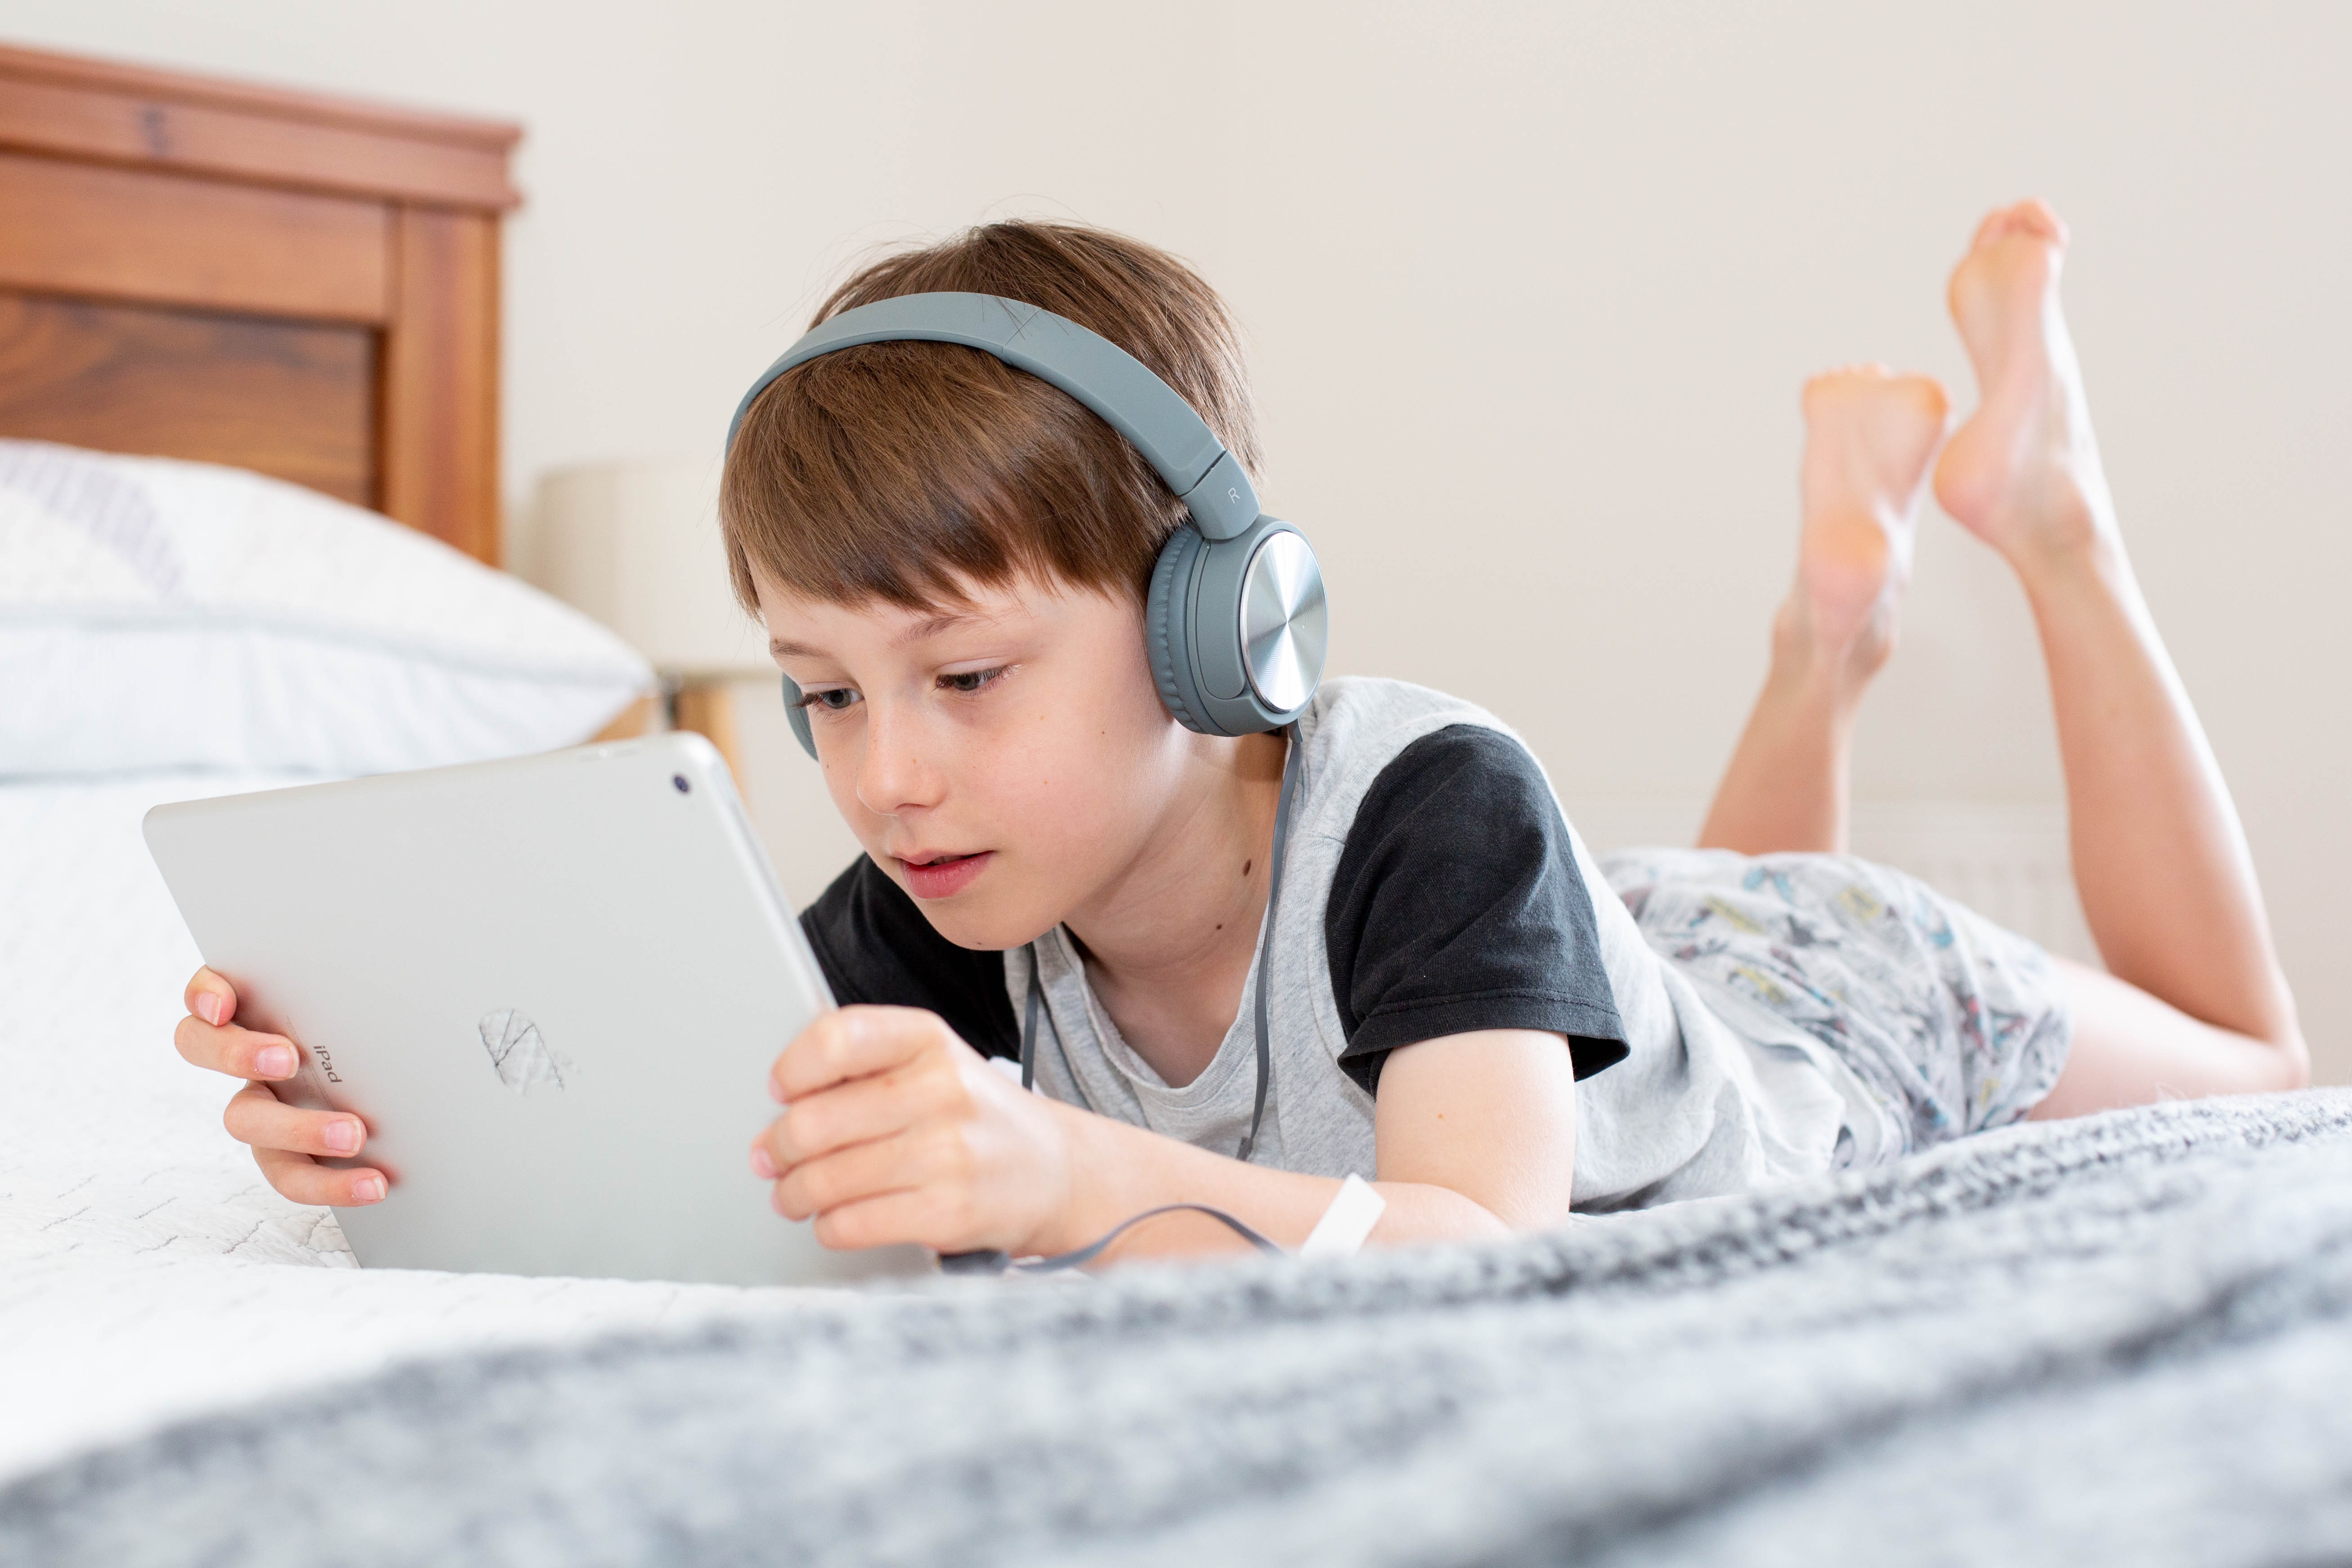 The iPhone and iPad offer parents the ability to set usage limits for their children.